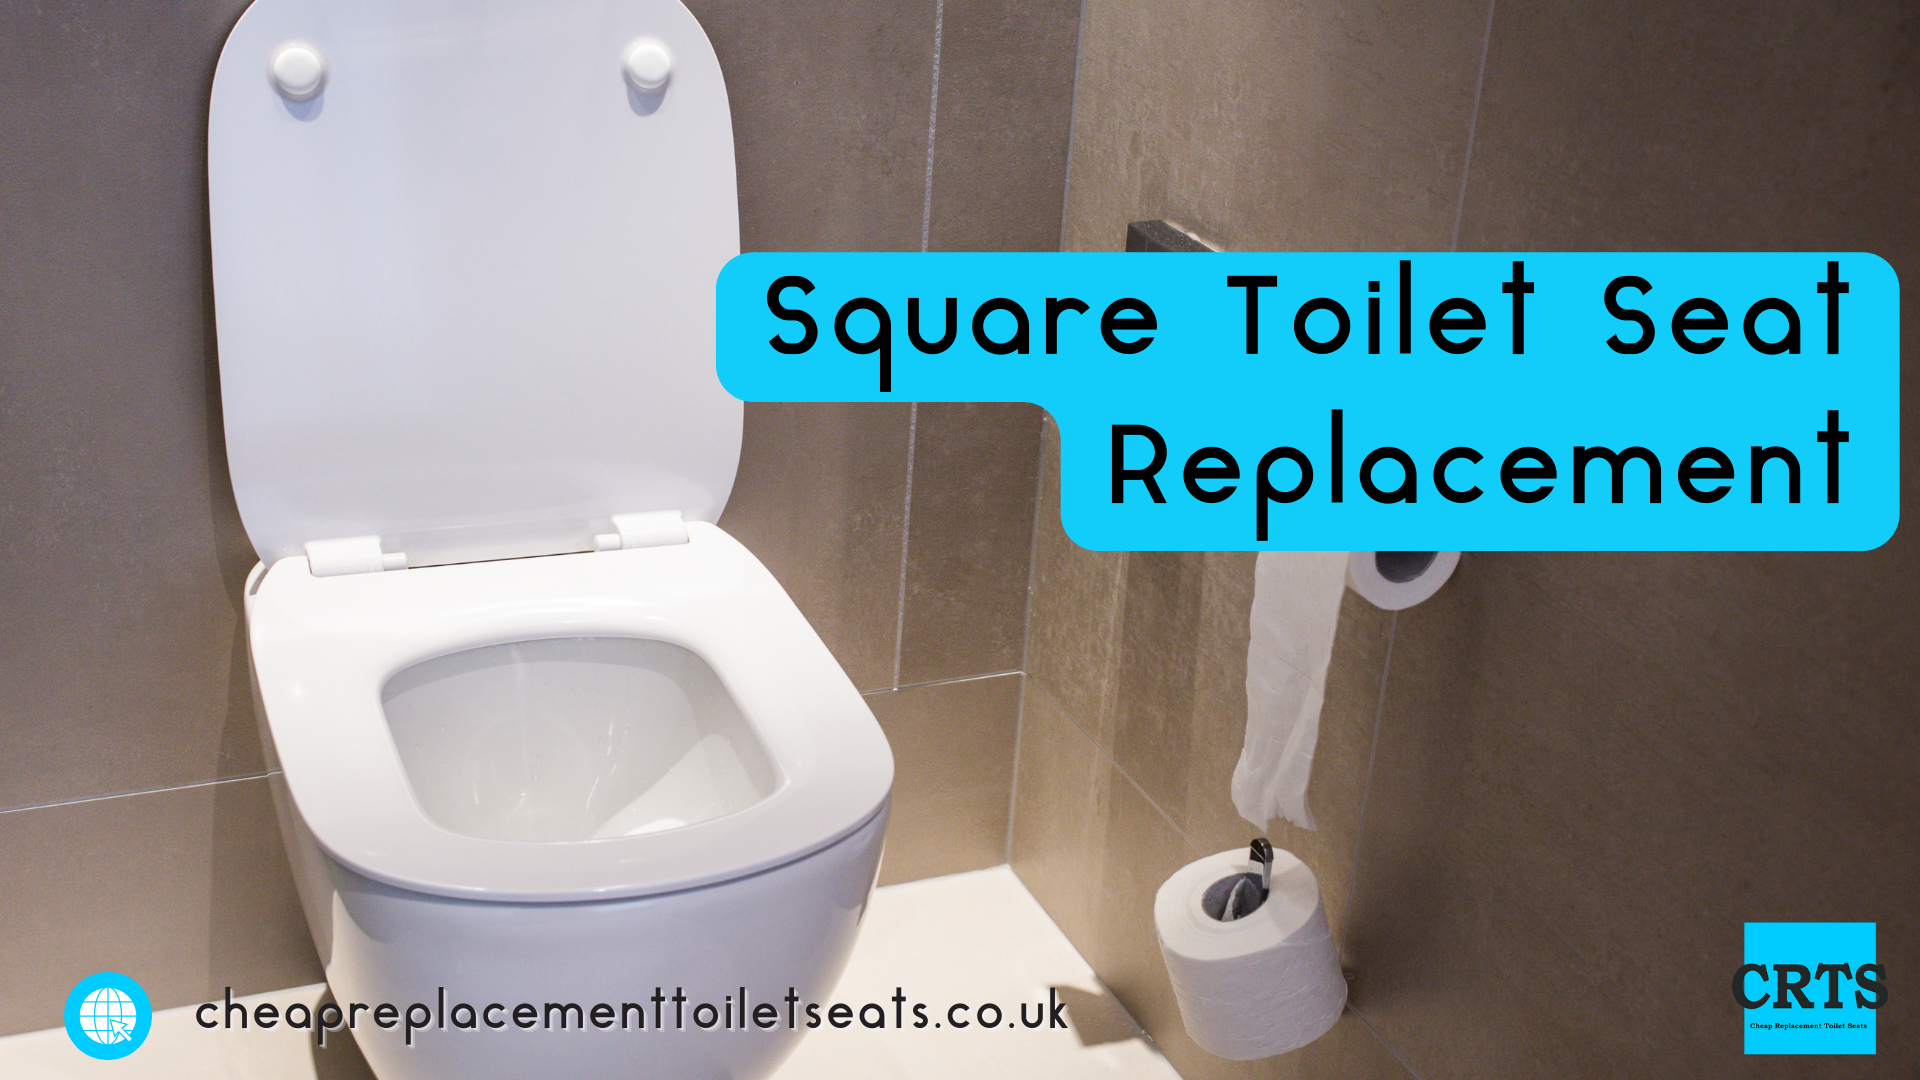 Square Toilet Seat Replacement